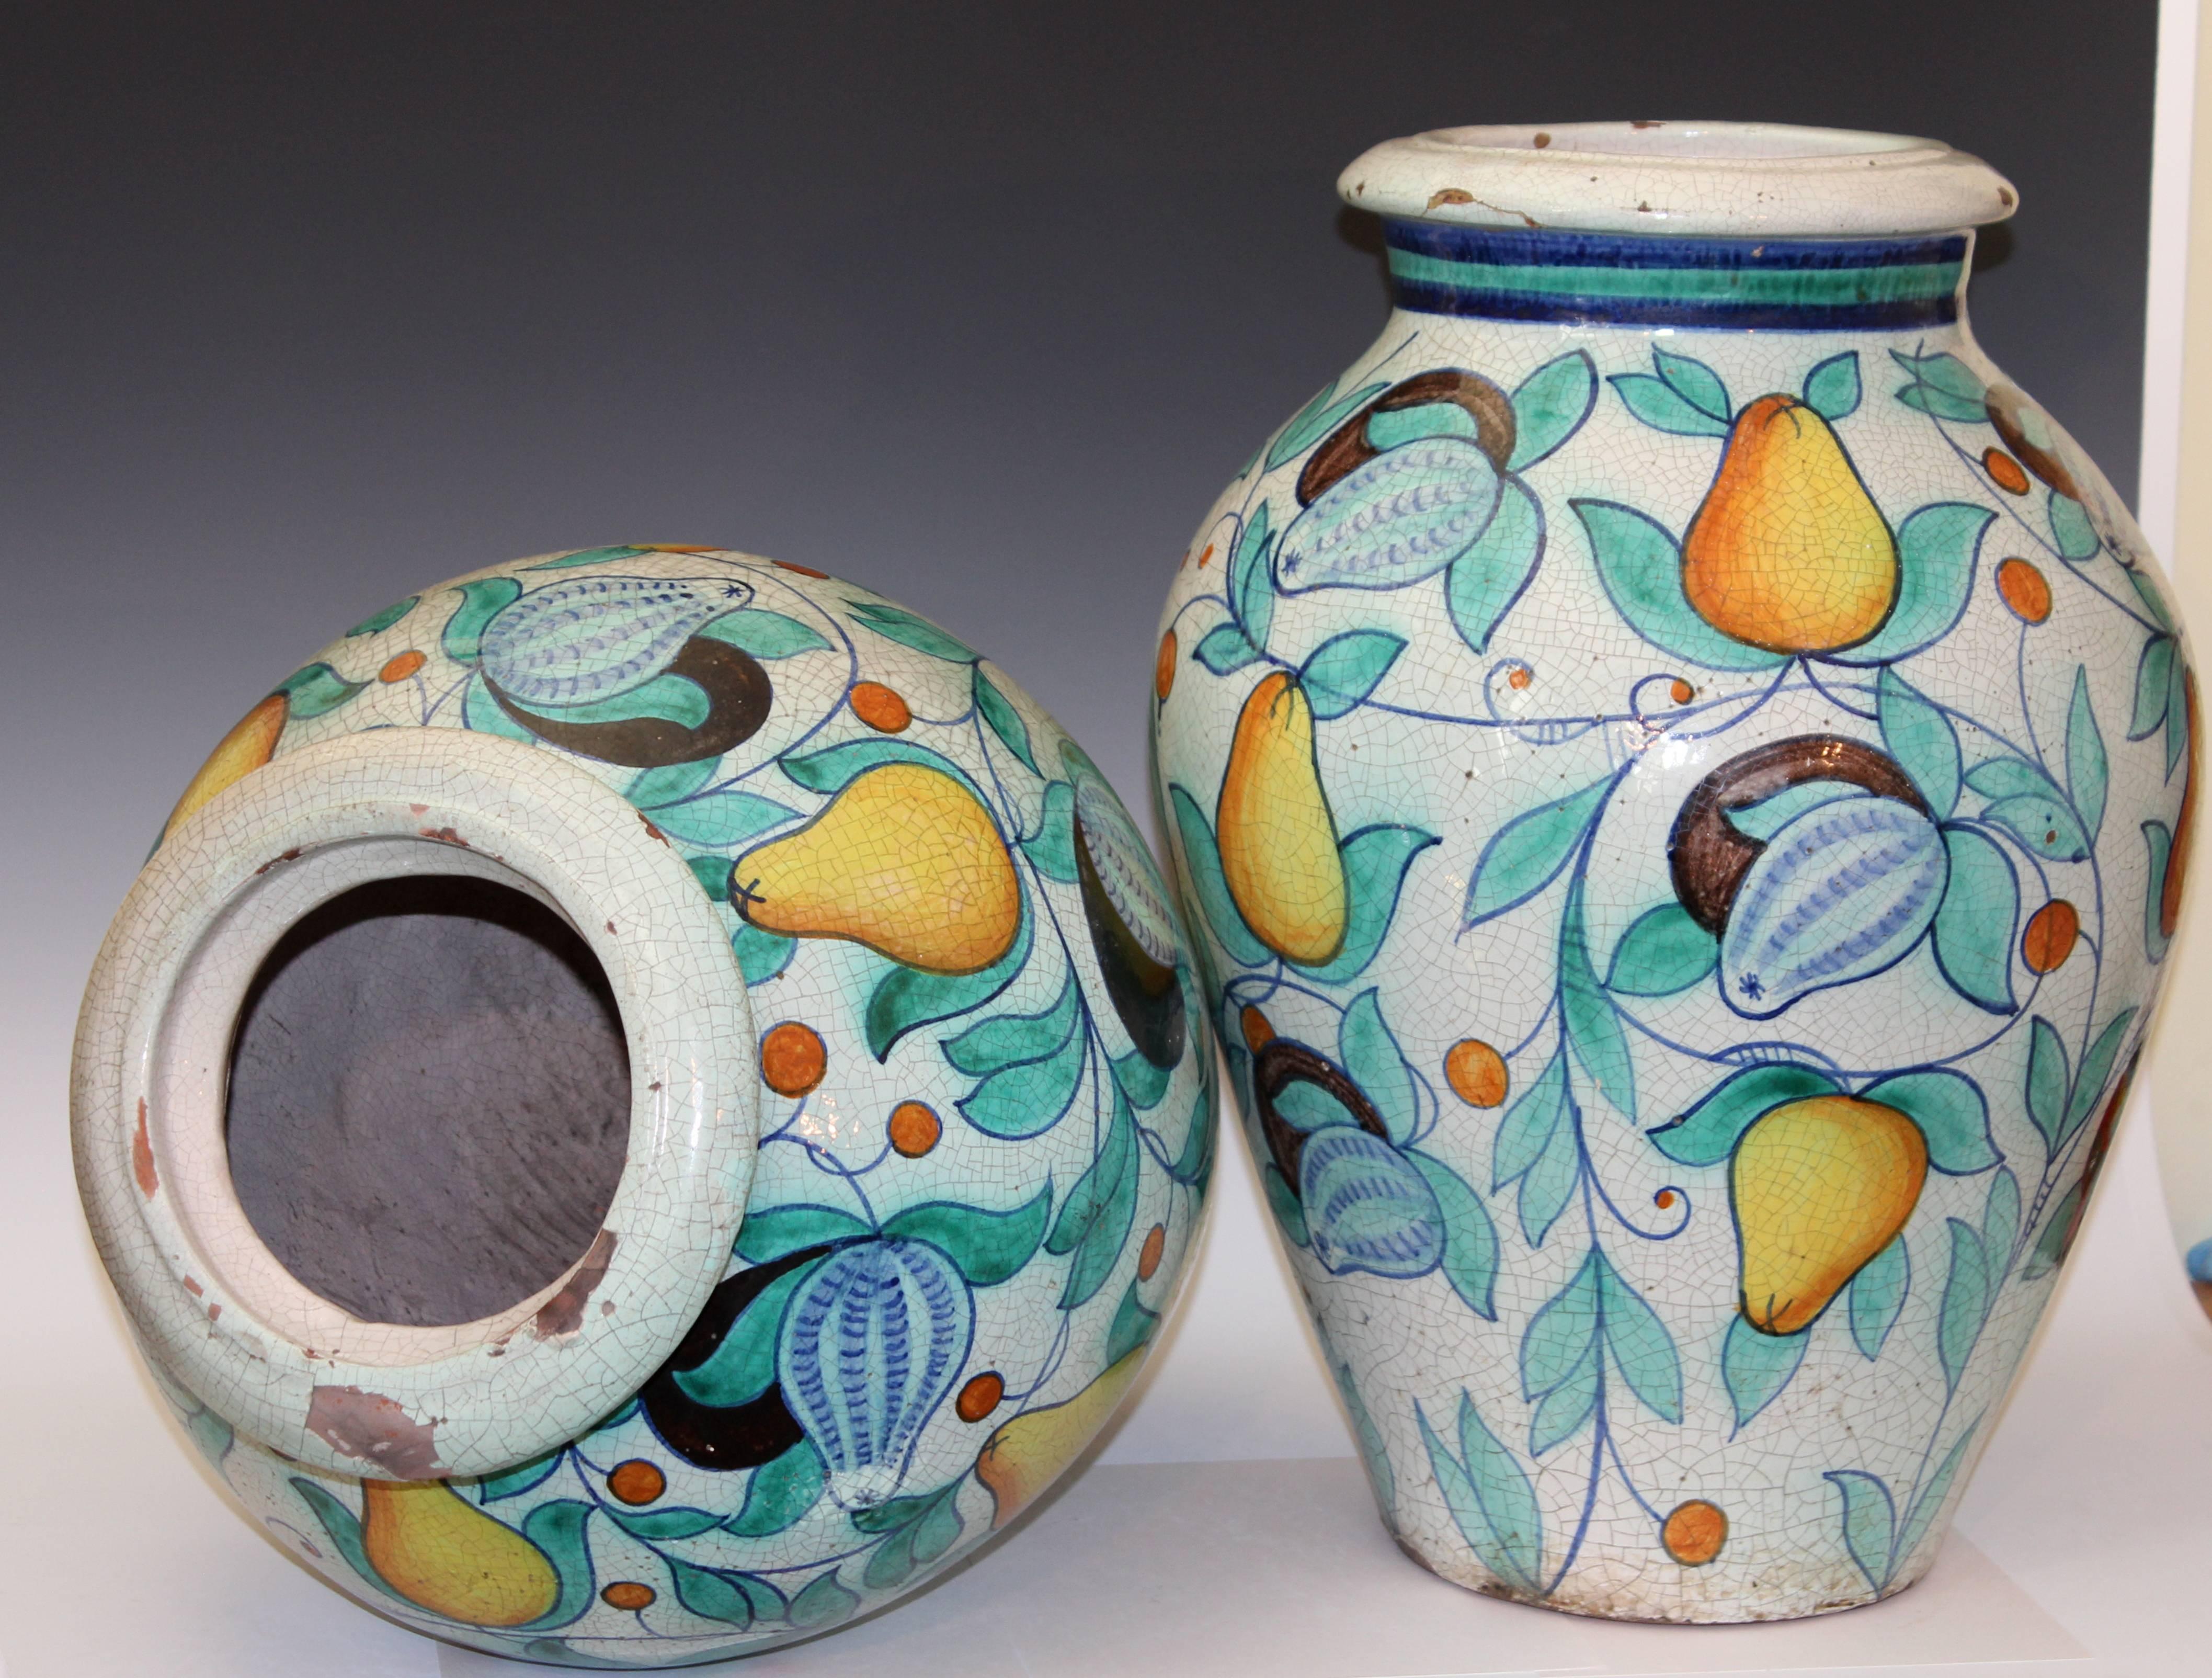 Large pair of old Deruta Italian faience pottery jars, circa early/mid 20th century. Painted in bright enamels with lyrical scrolls of pears and pomegranates on a crackled tin glaze ground.  22